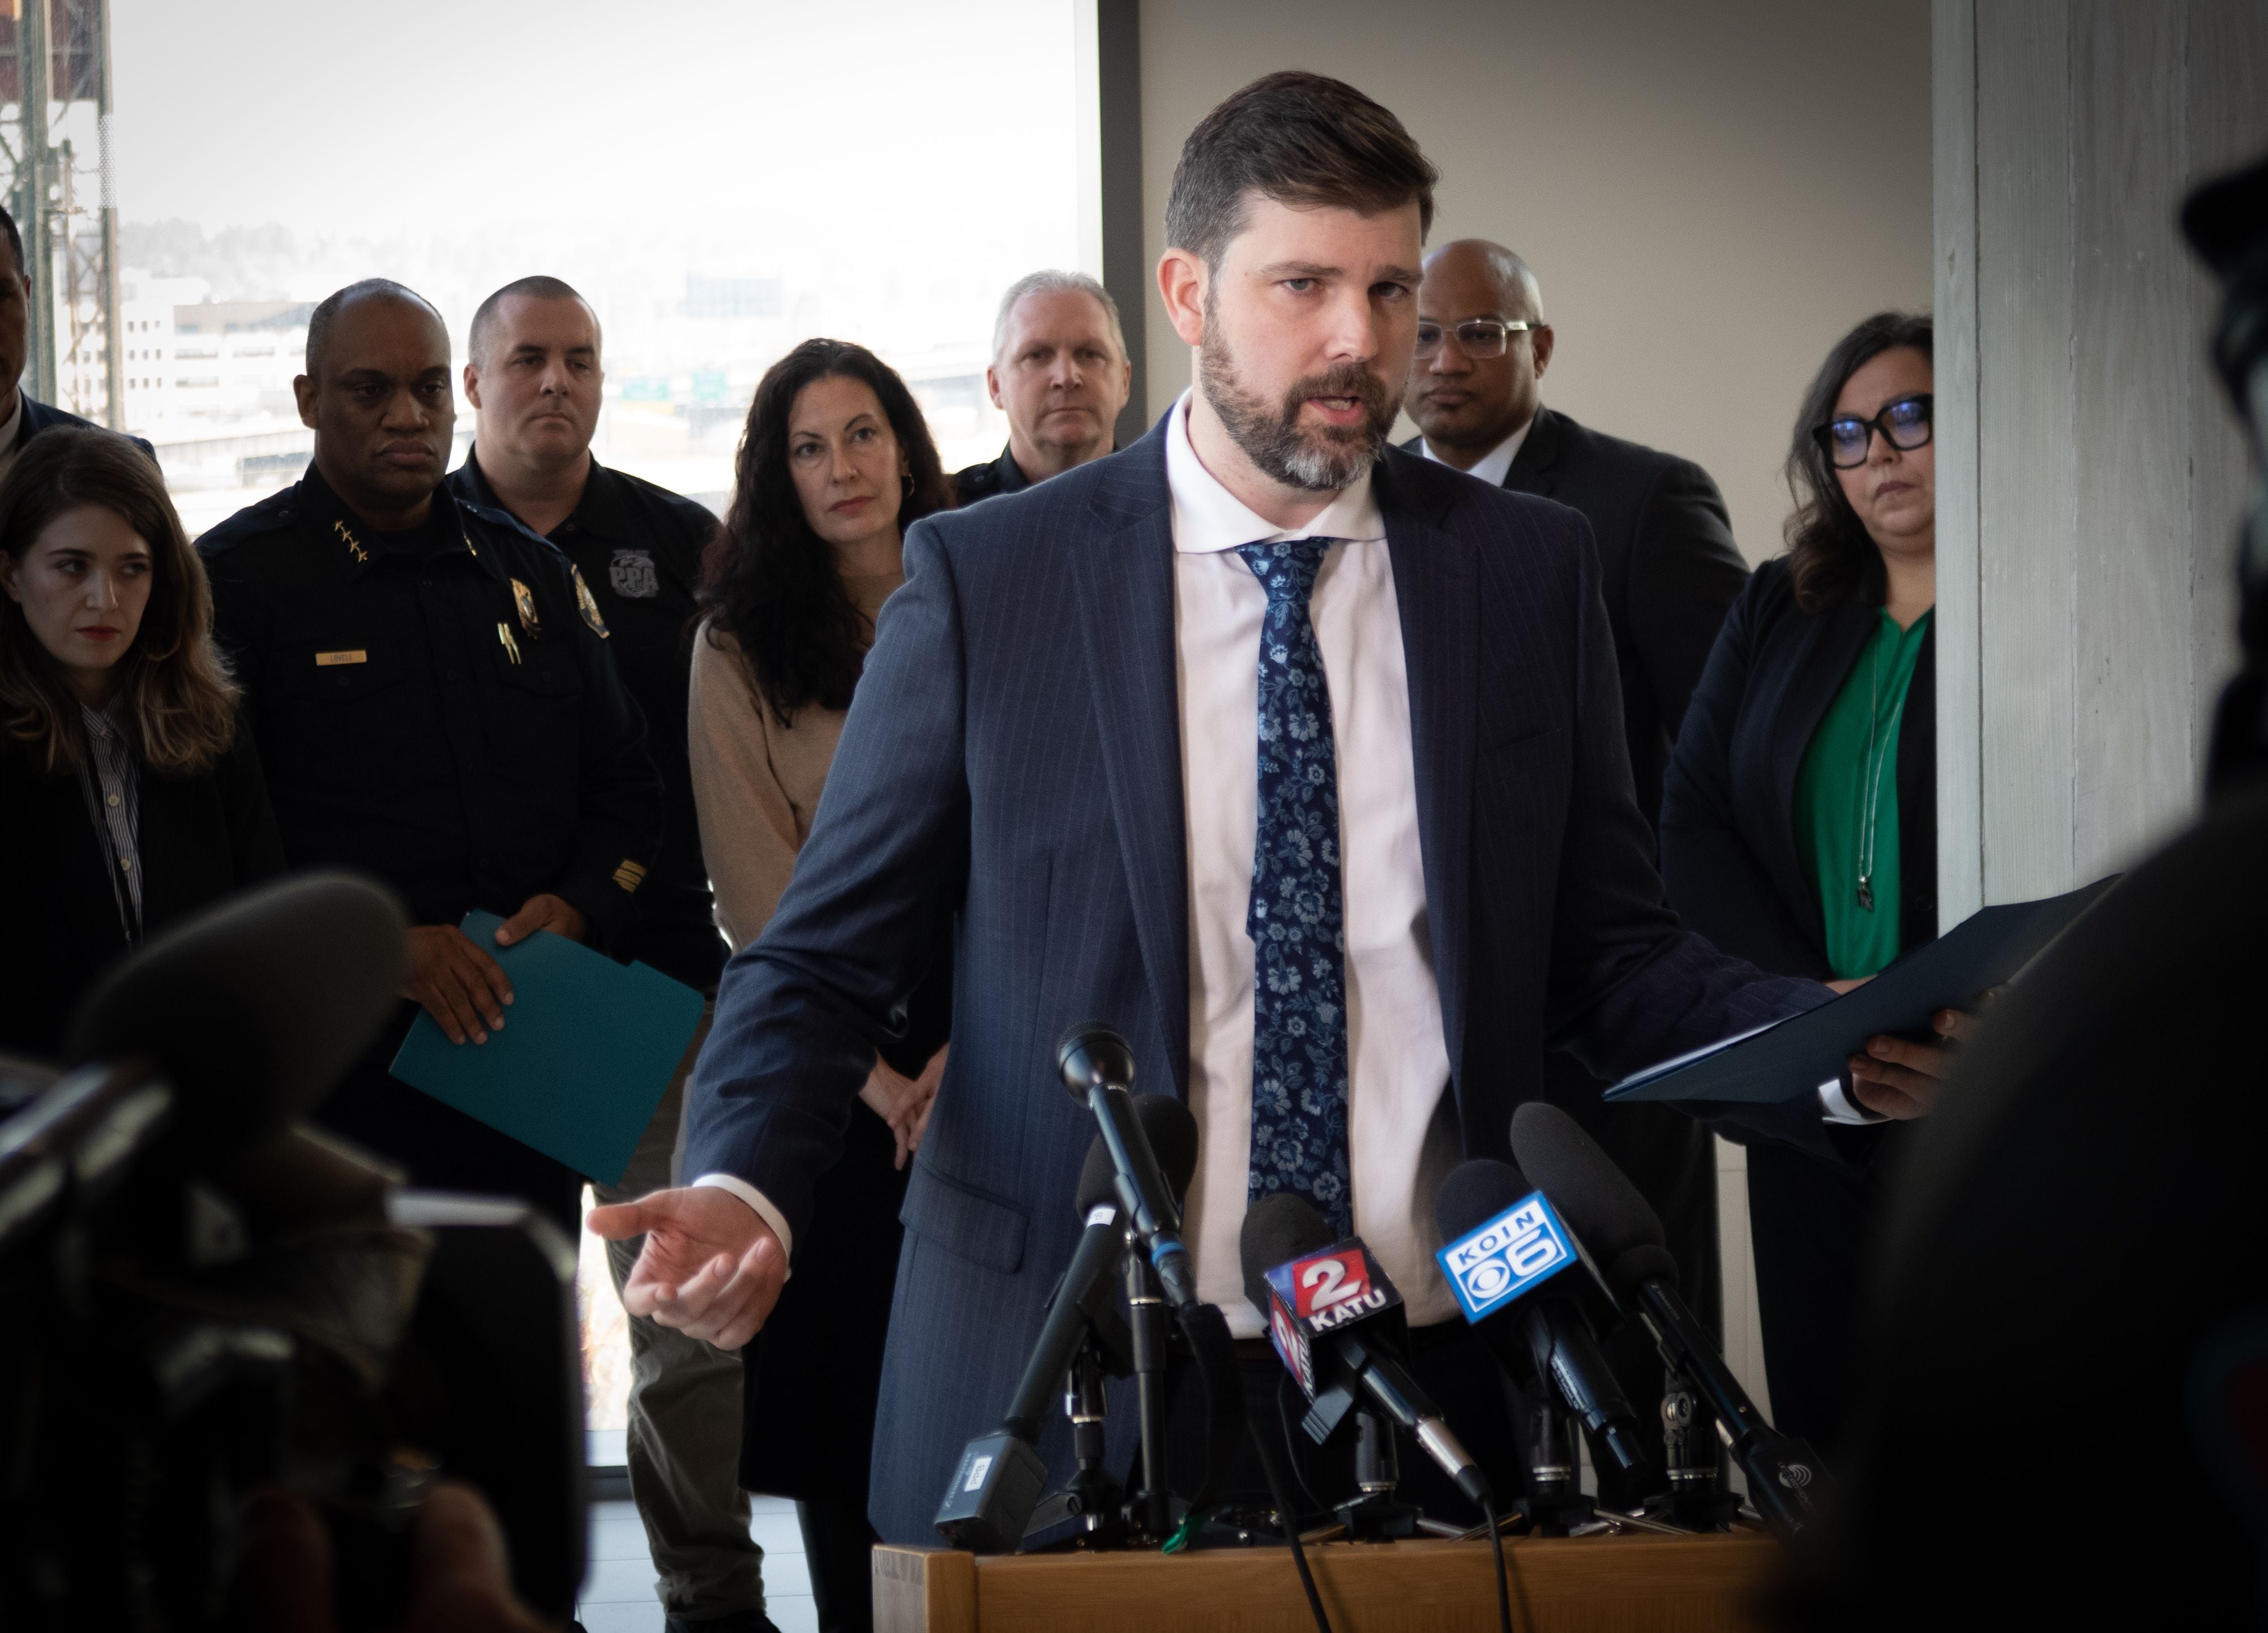 FILE - Multnomah County District Attorney Mike Schmidt speaks at a press conference at the Multnomah County Courthouse in Portland, Ore., on Dec. 14, 2022. Schmidt is running for reelection againts one of the top attorneys in his office, Nathan Vasquez.